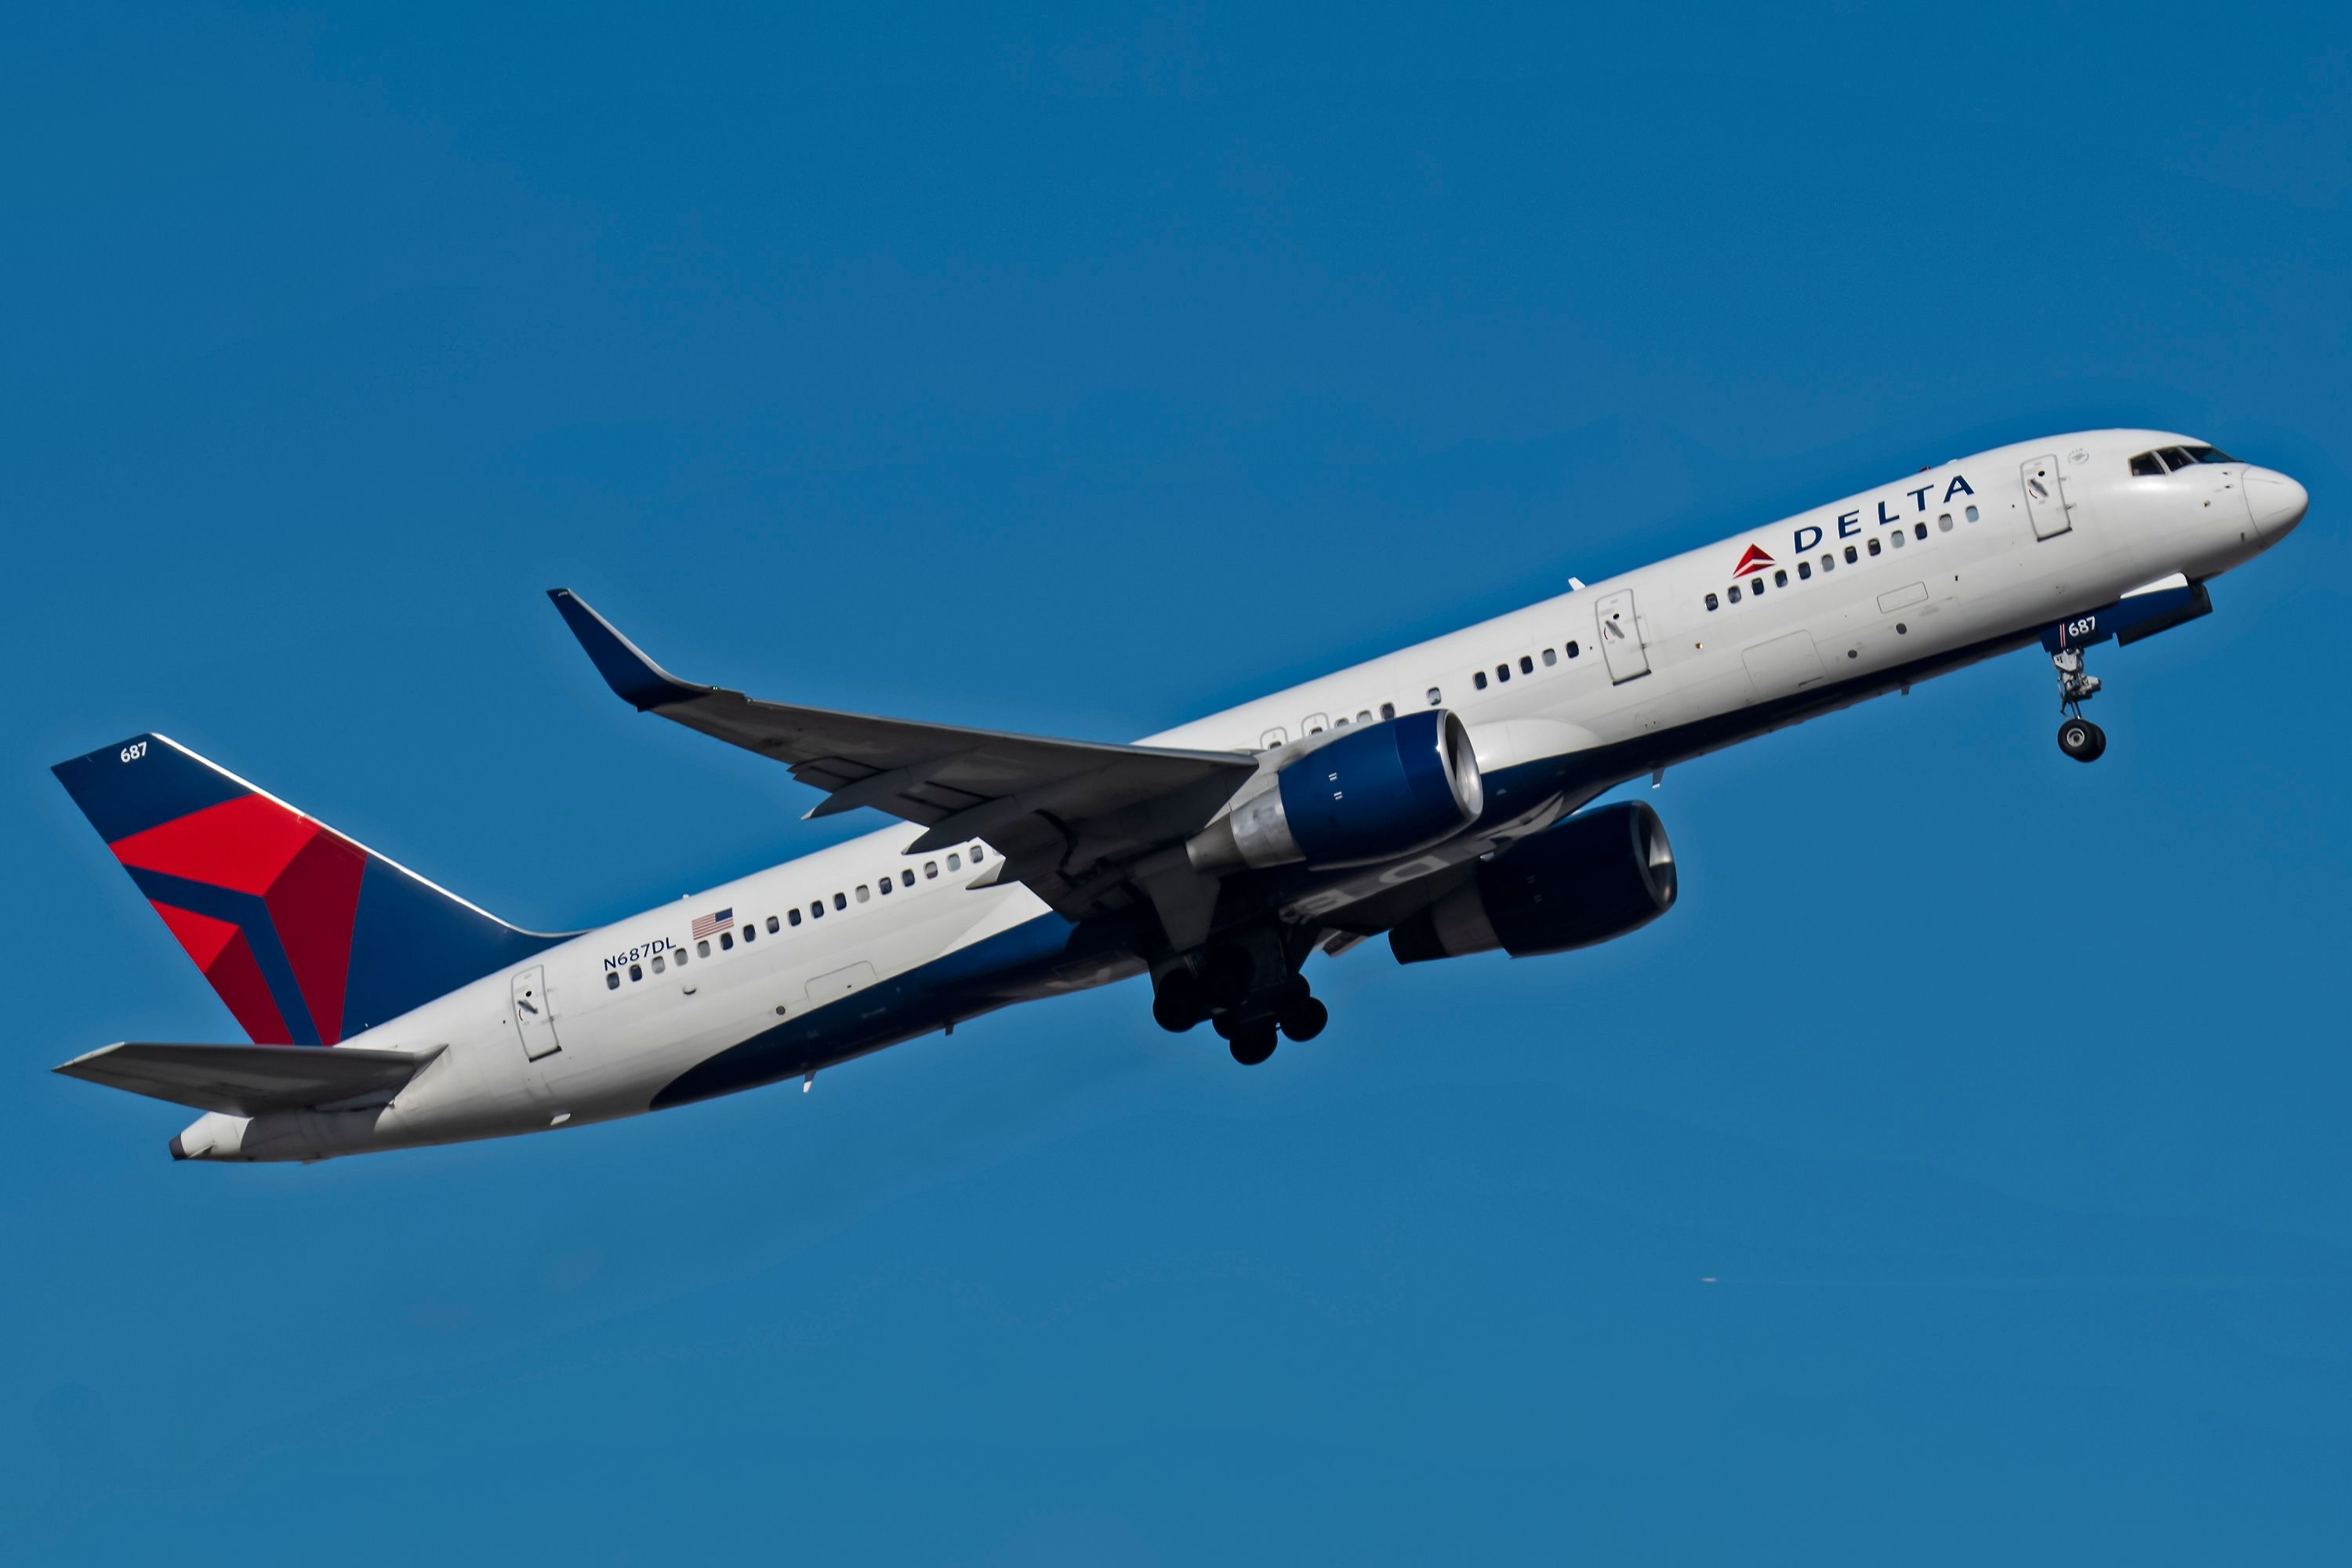 A Delta Air Lines 757-200 taking off.